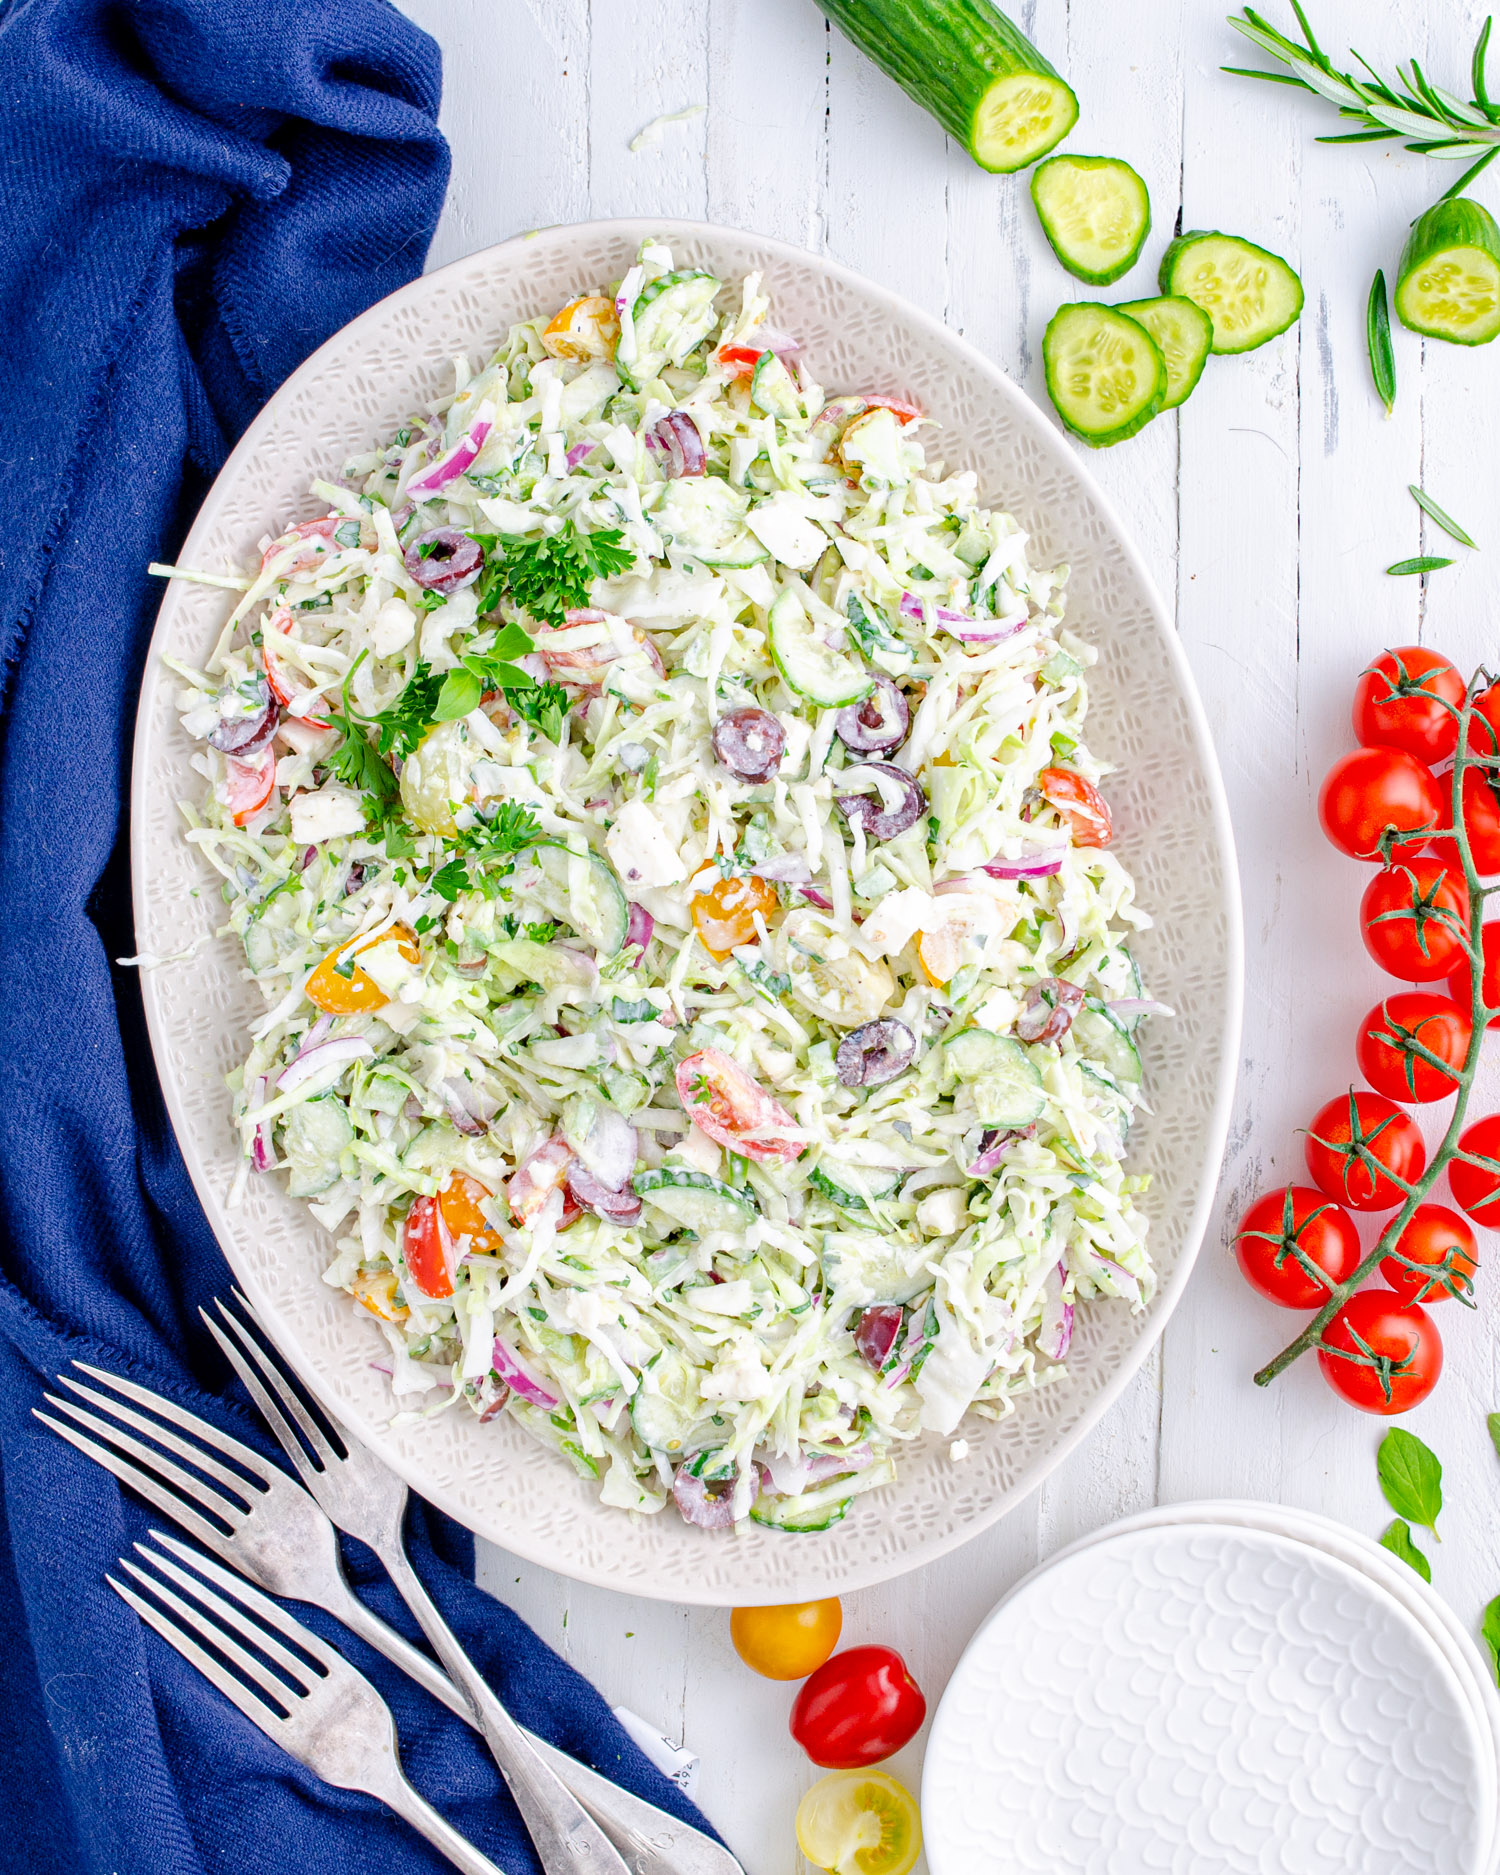 Creamy low carb Greek coleslaw on a serving tray